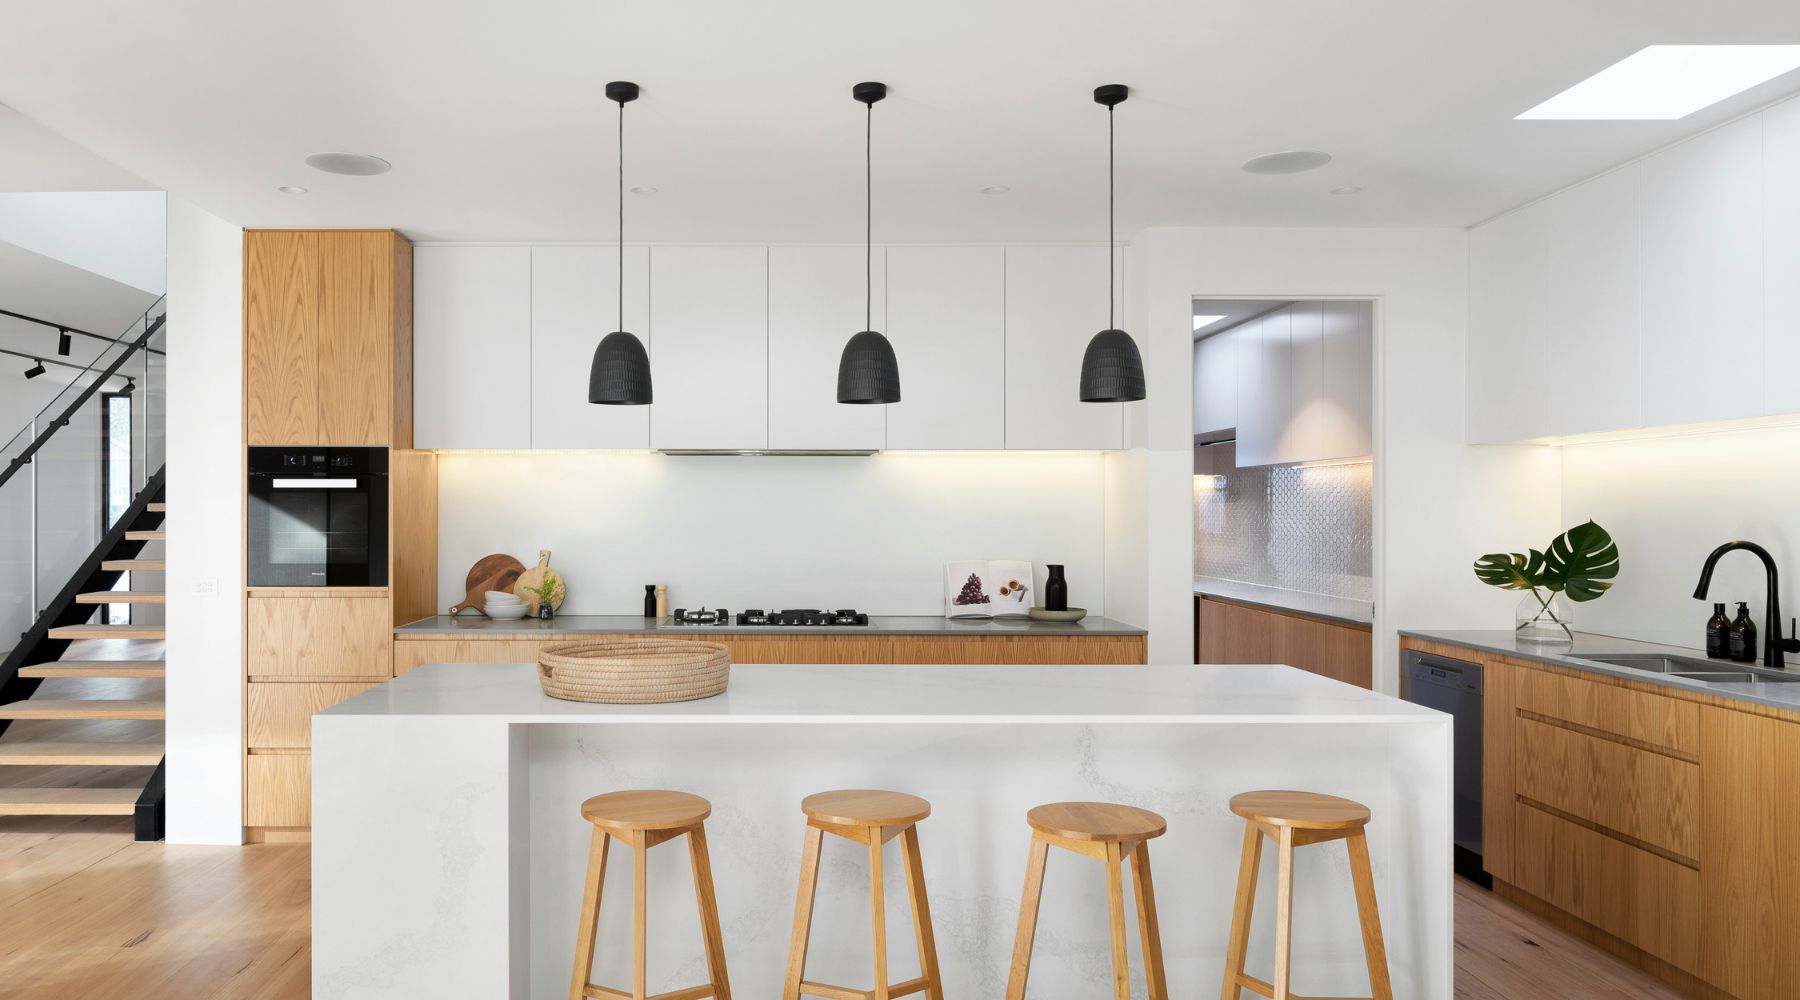 Energy-Efficient Lighting: A Winning Combination of Style, Functionality, and Sustainability